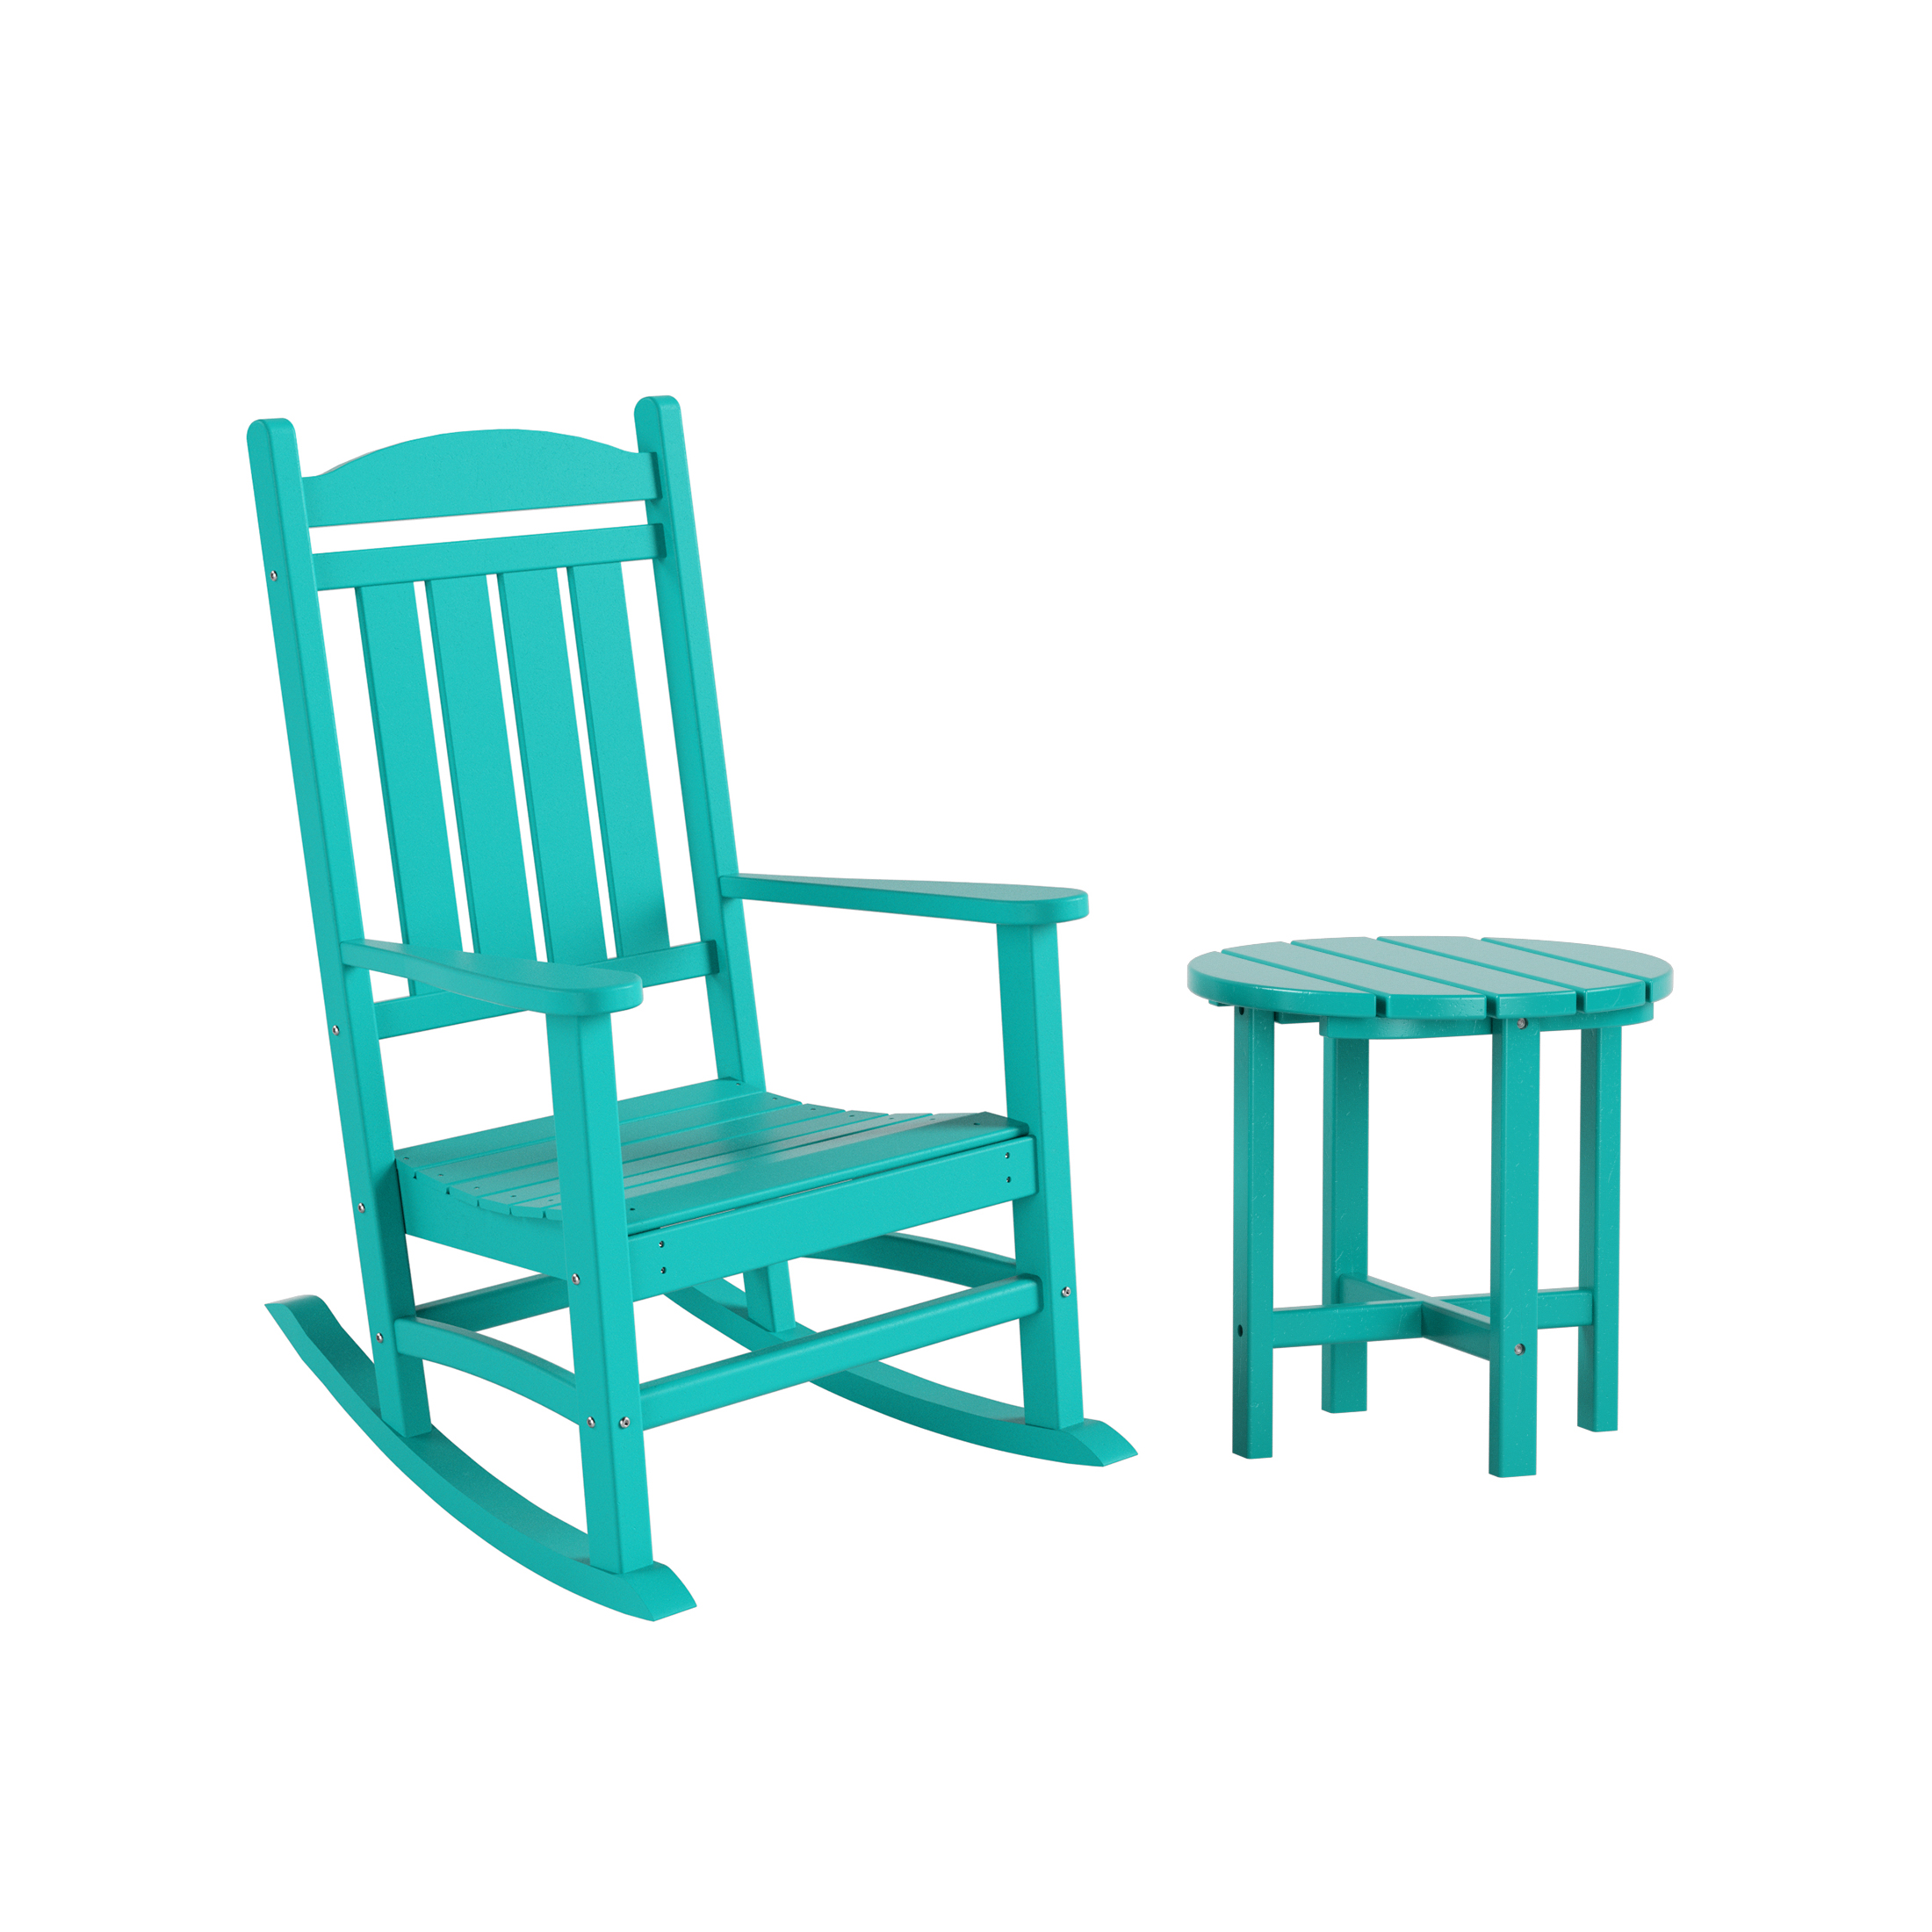 GARDEN 2-Piece Set Classic Plastic Porch Rocking Chair with Round Side Table Included, Turquoise - image 2 of 7